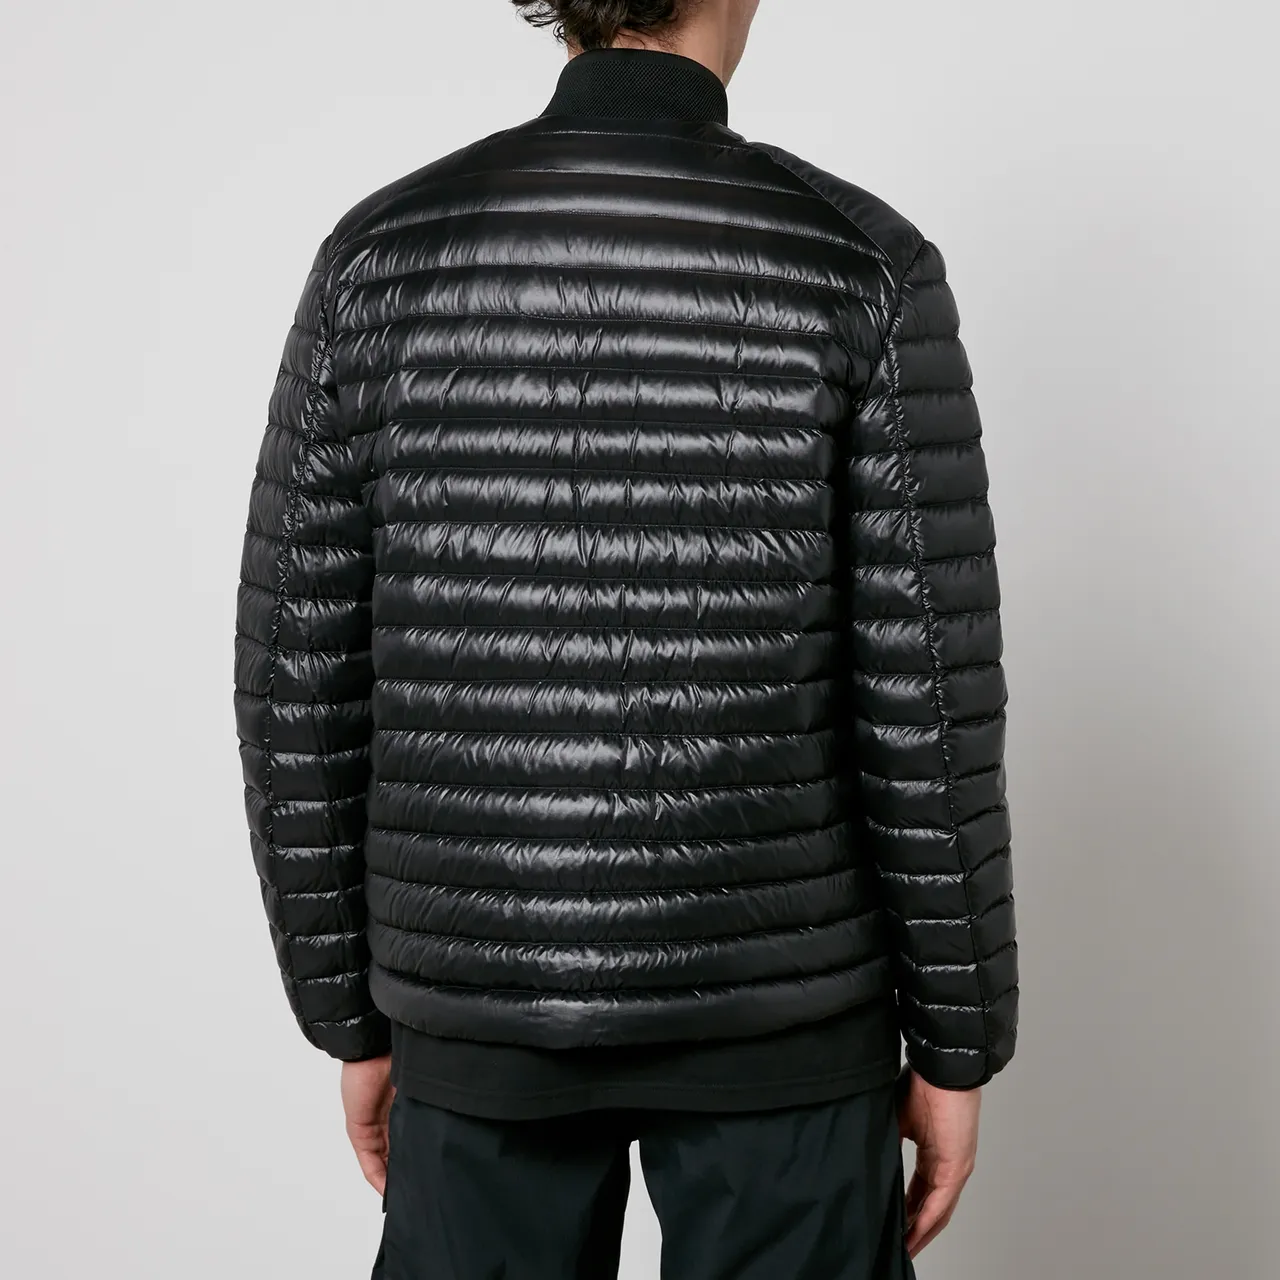 Belstaff Airframe Quilted Nylon Jacket - IT 50/